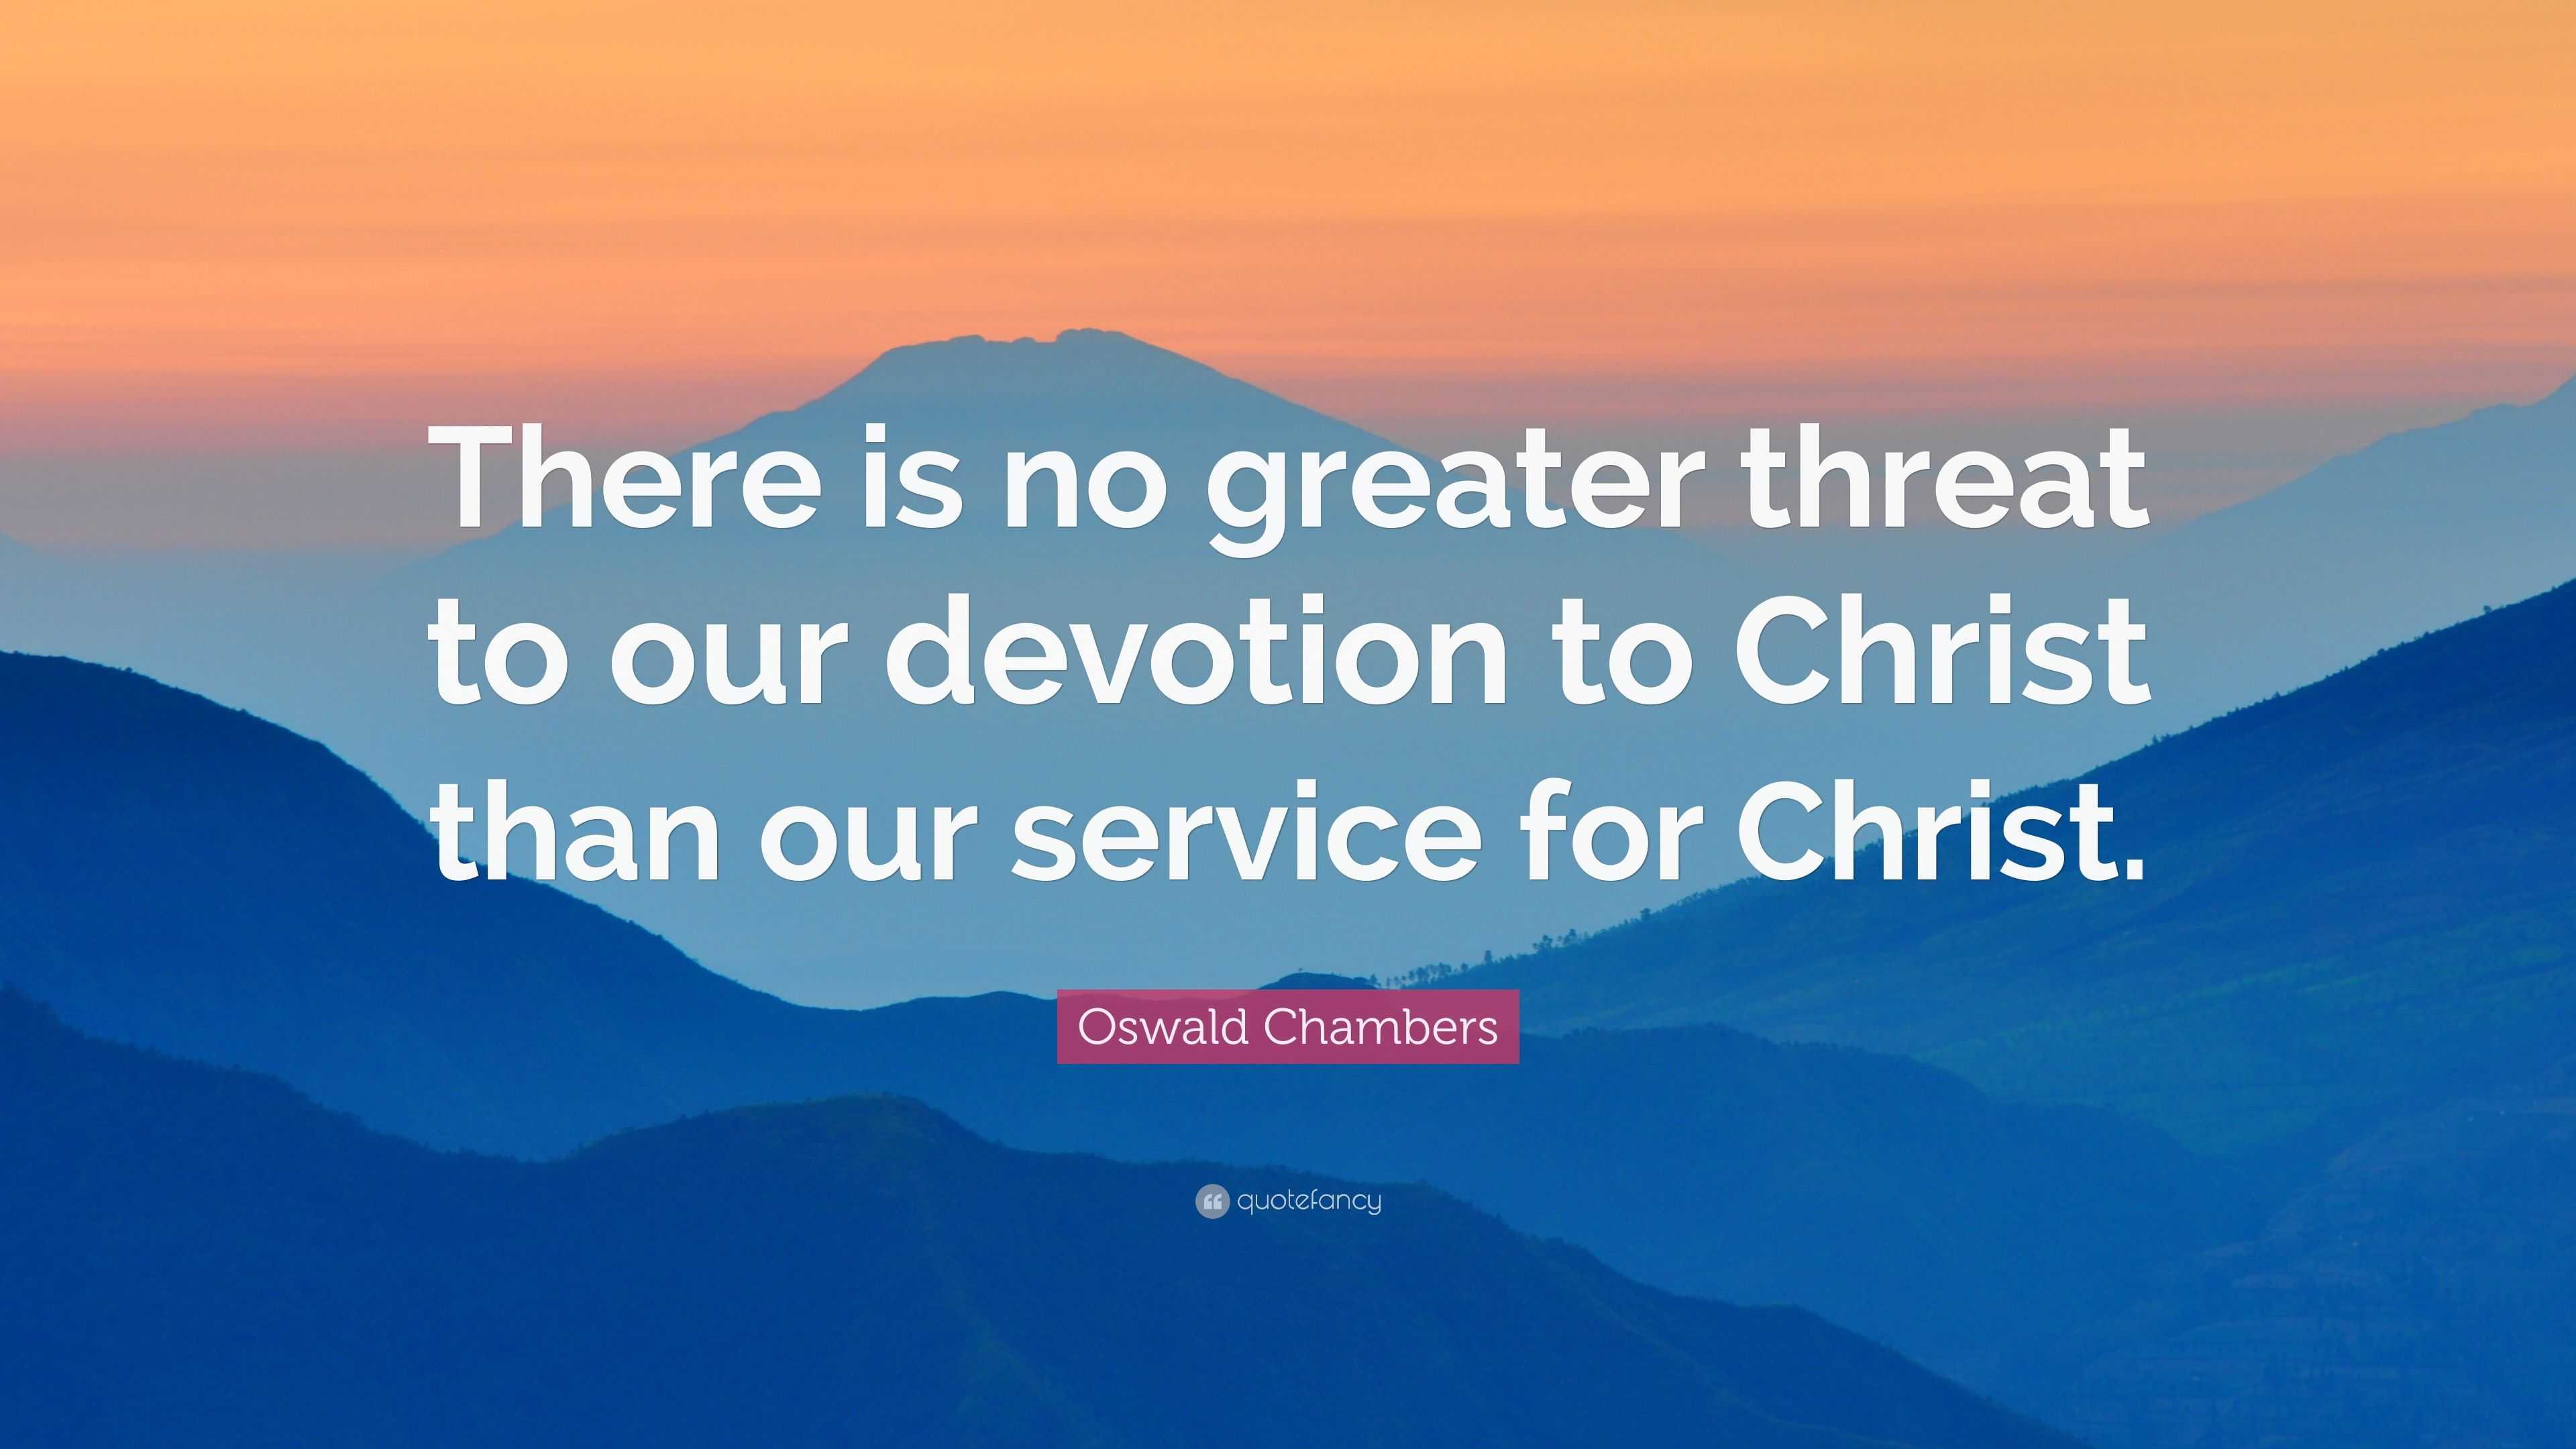 Oswald Chambers Quote: “There is no greater threat to our devotion to ...